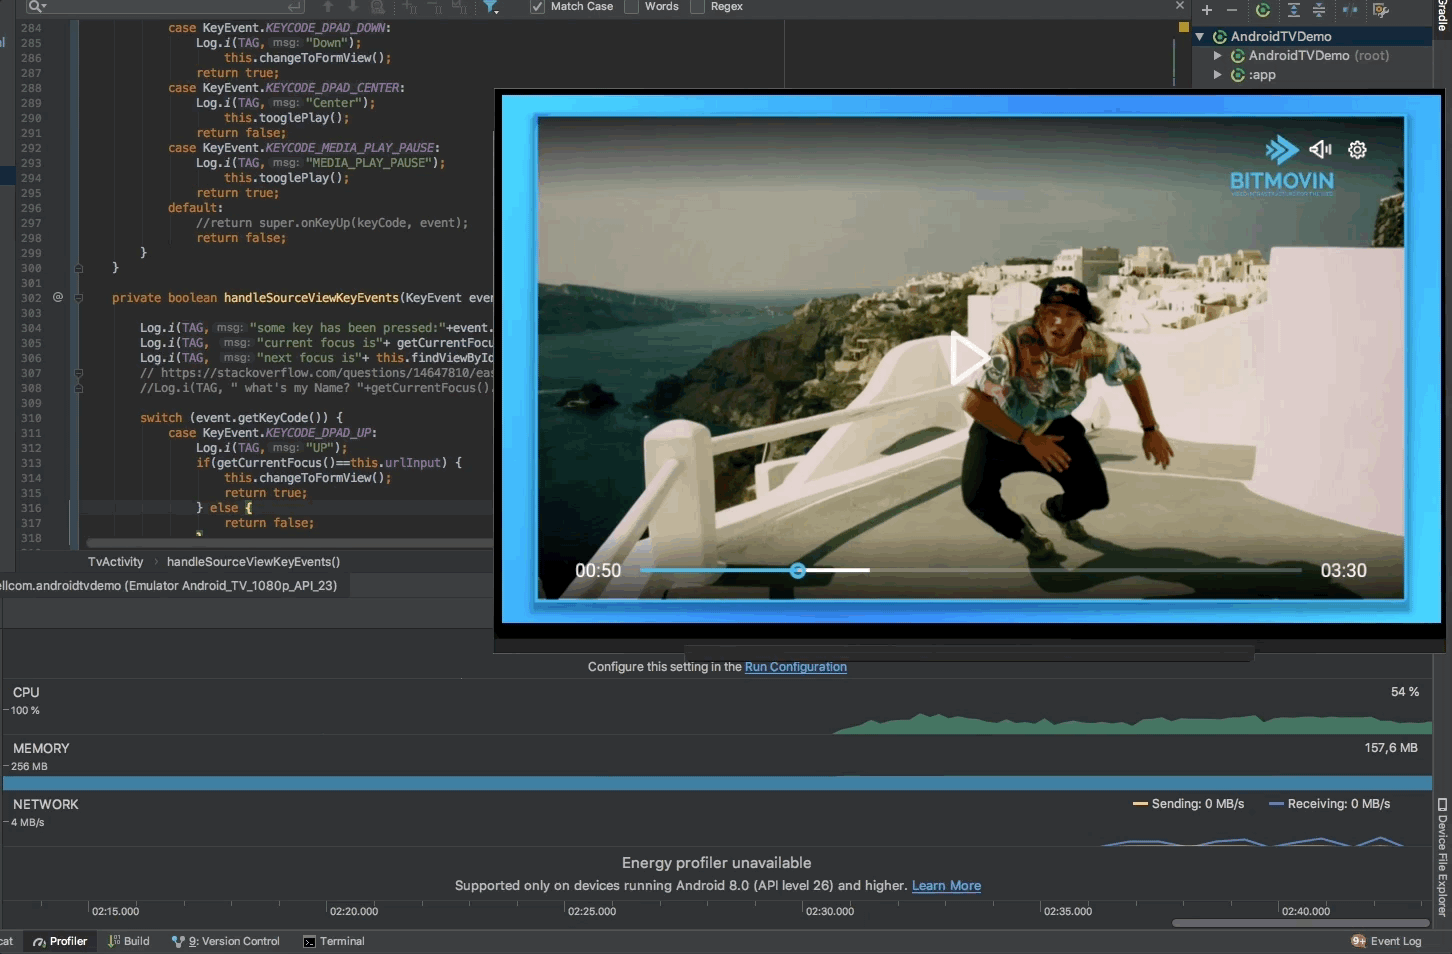 Android Studio showing emulator of Android TV app with network and CPU profiler